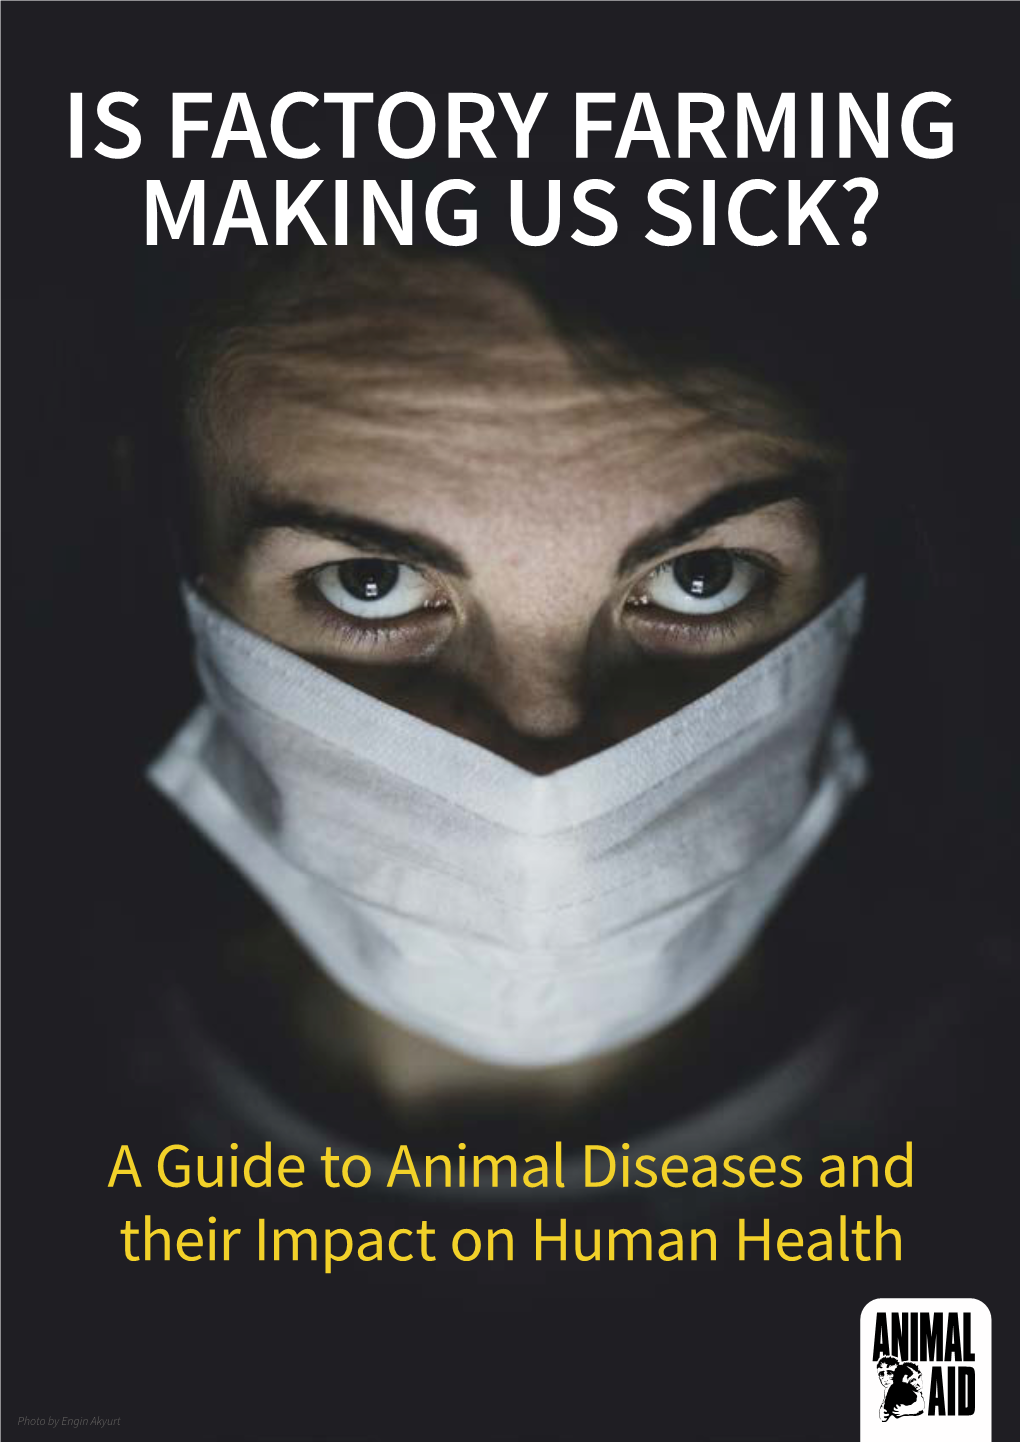 Is Factory Farming Making Us Sick? IS FACTORY FARMING MAKING US SICK?